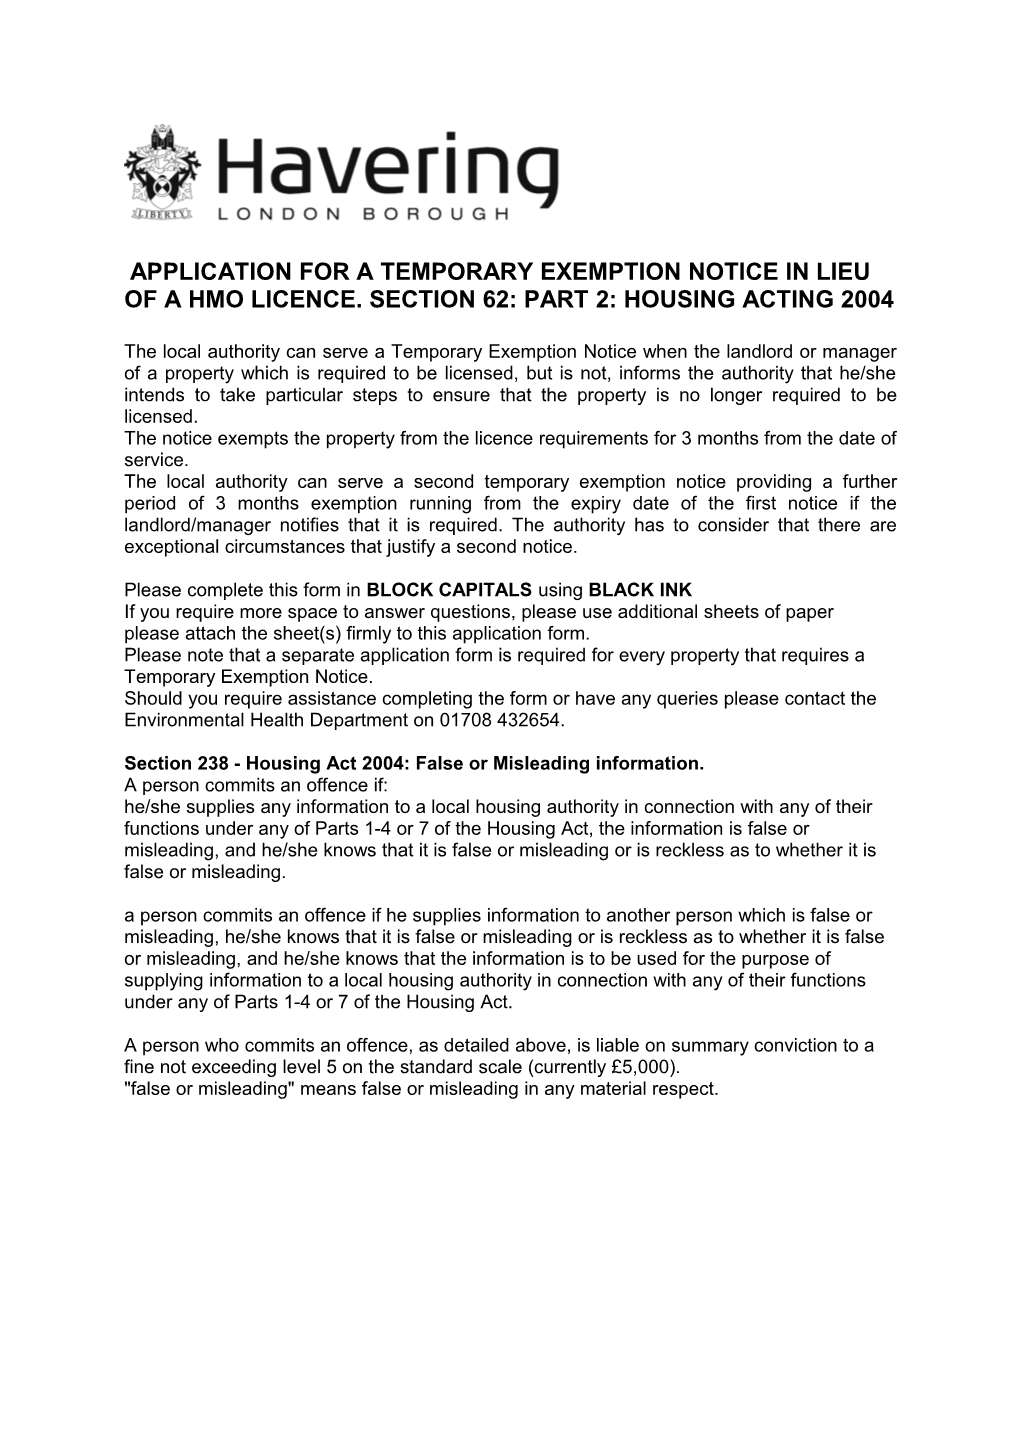 Temporary Exemption Notice in Lieu of a HMO Licence